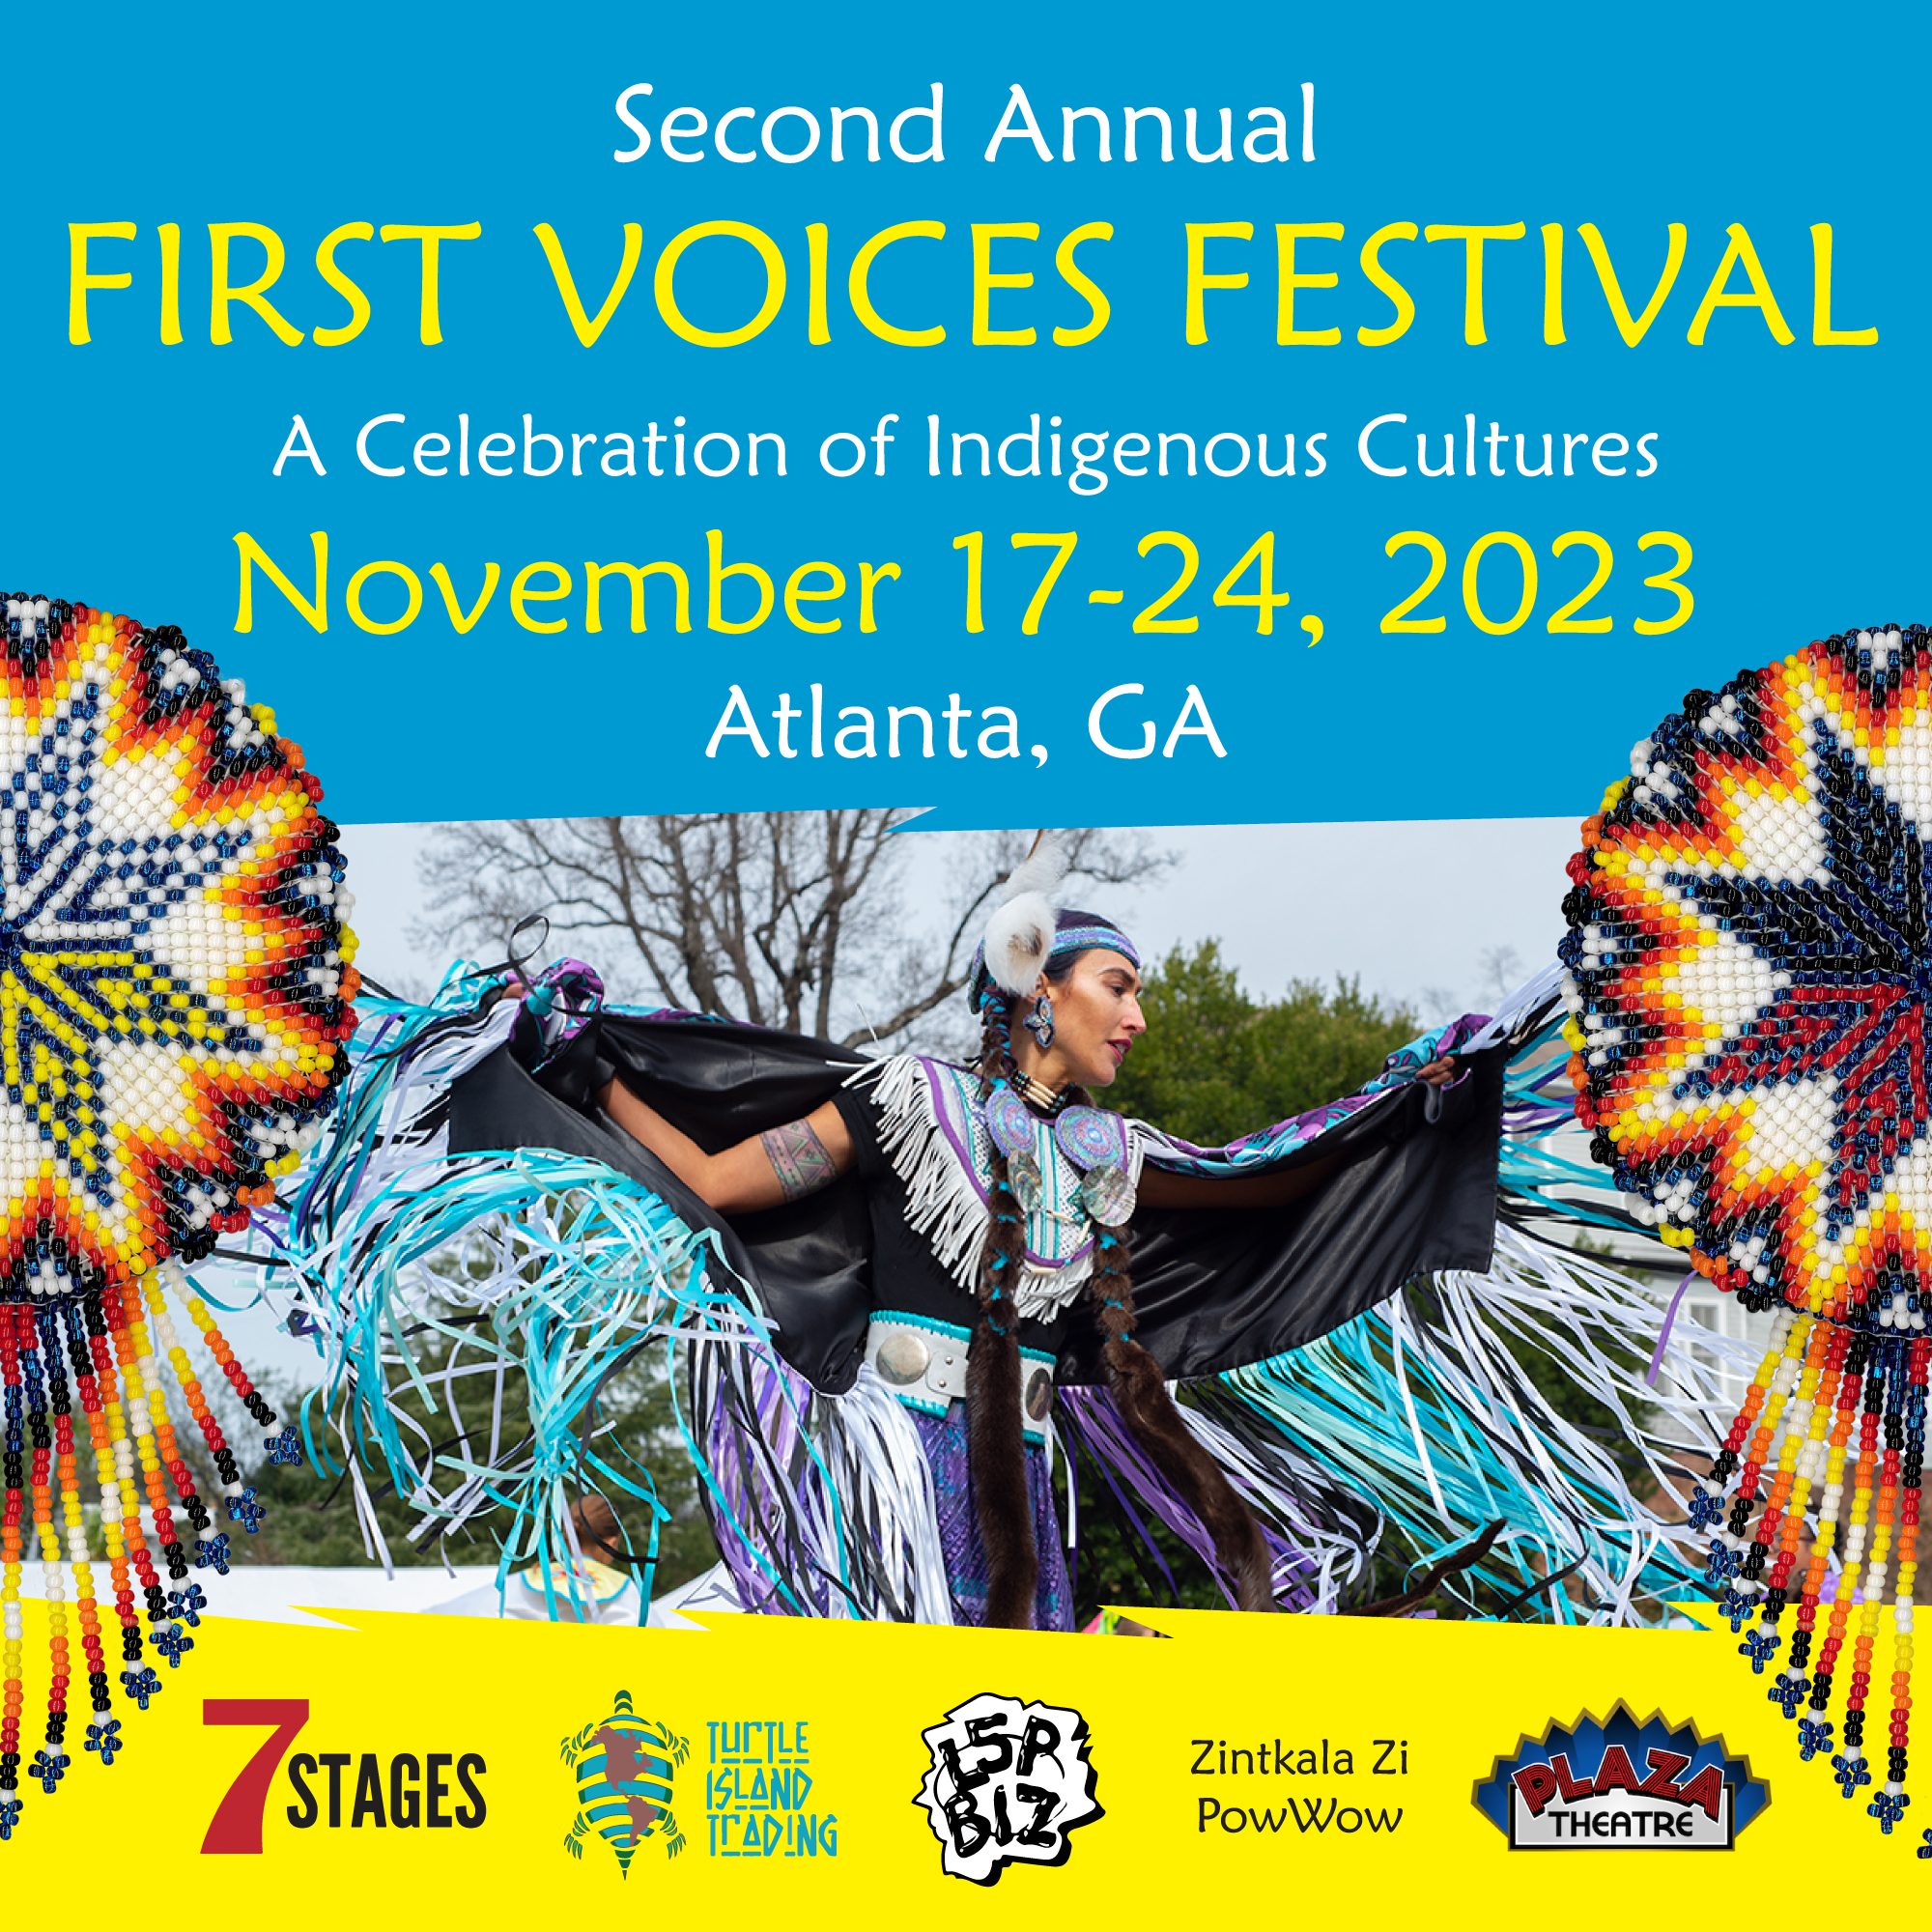 Second Annual First Voices Festival. A celebration of Indigenous cultures. November 17-24, 2023. Atlanta, GA